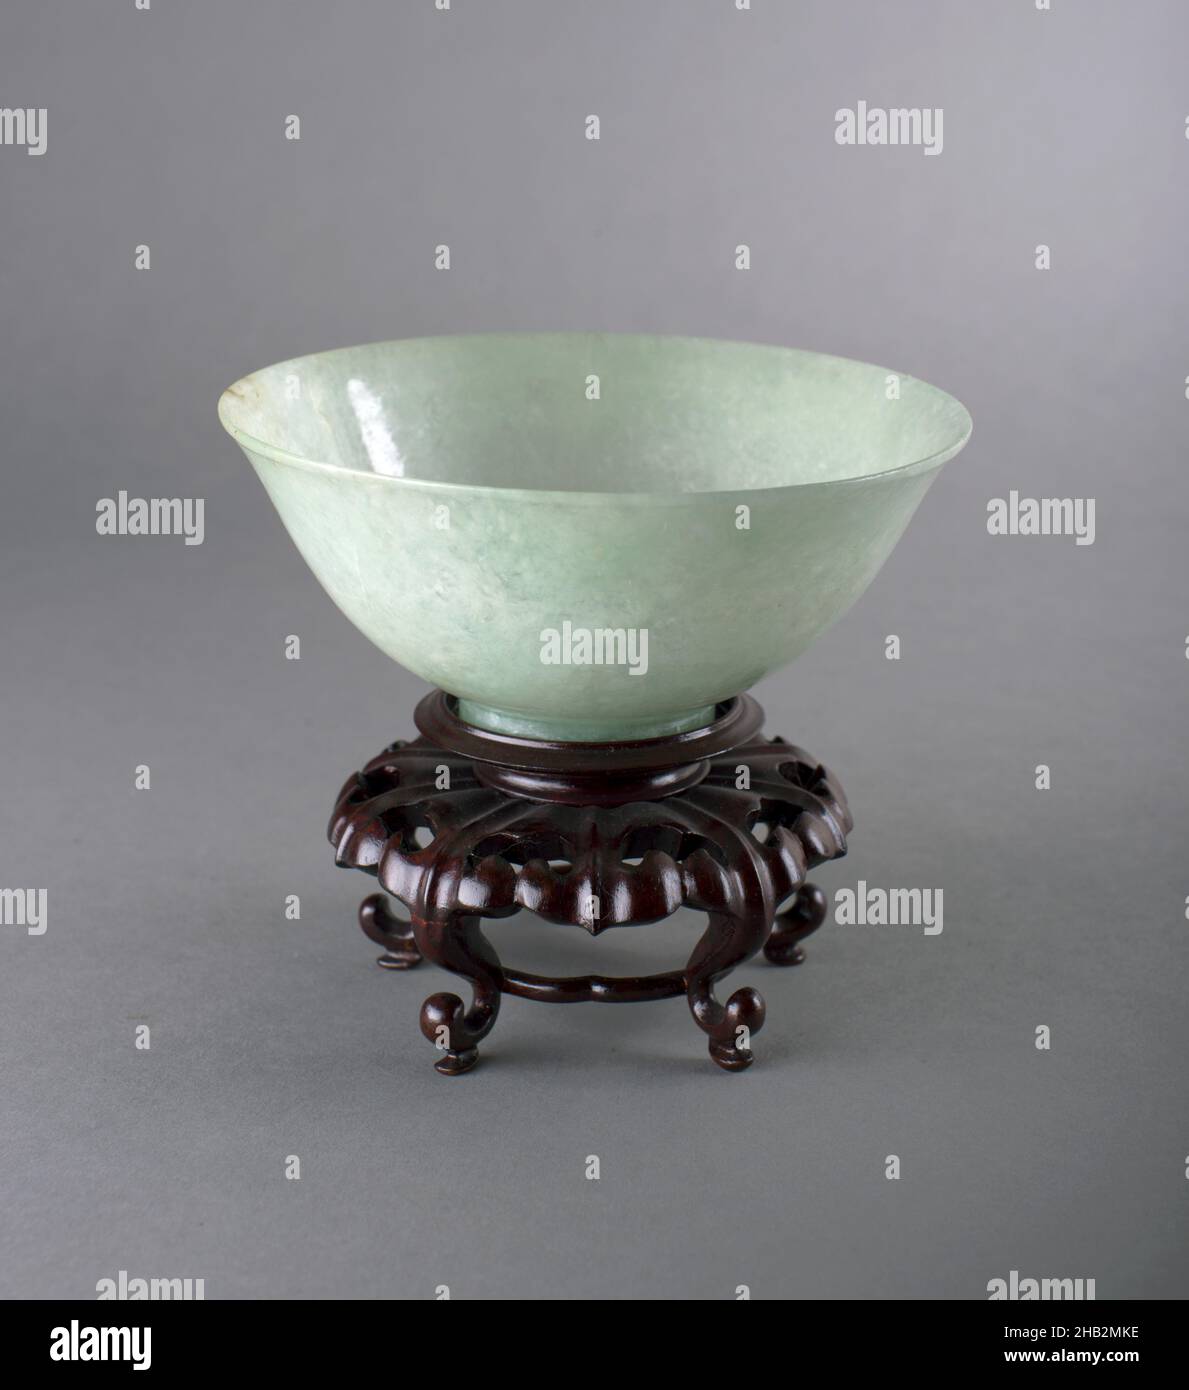 Bowl, Chinese, Qing dynasty, 1644–1911, Qianlong period, 1736–1795, mid- to late 18th century, Flourite, Made in China, Asia, Containers, stone & mineral, height with stand: 4 in. (10.2 cm Stock Photo